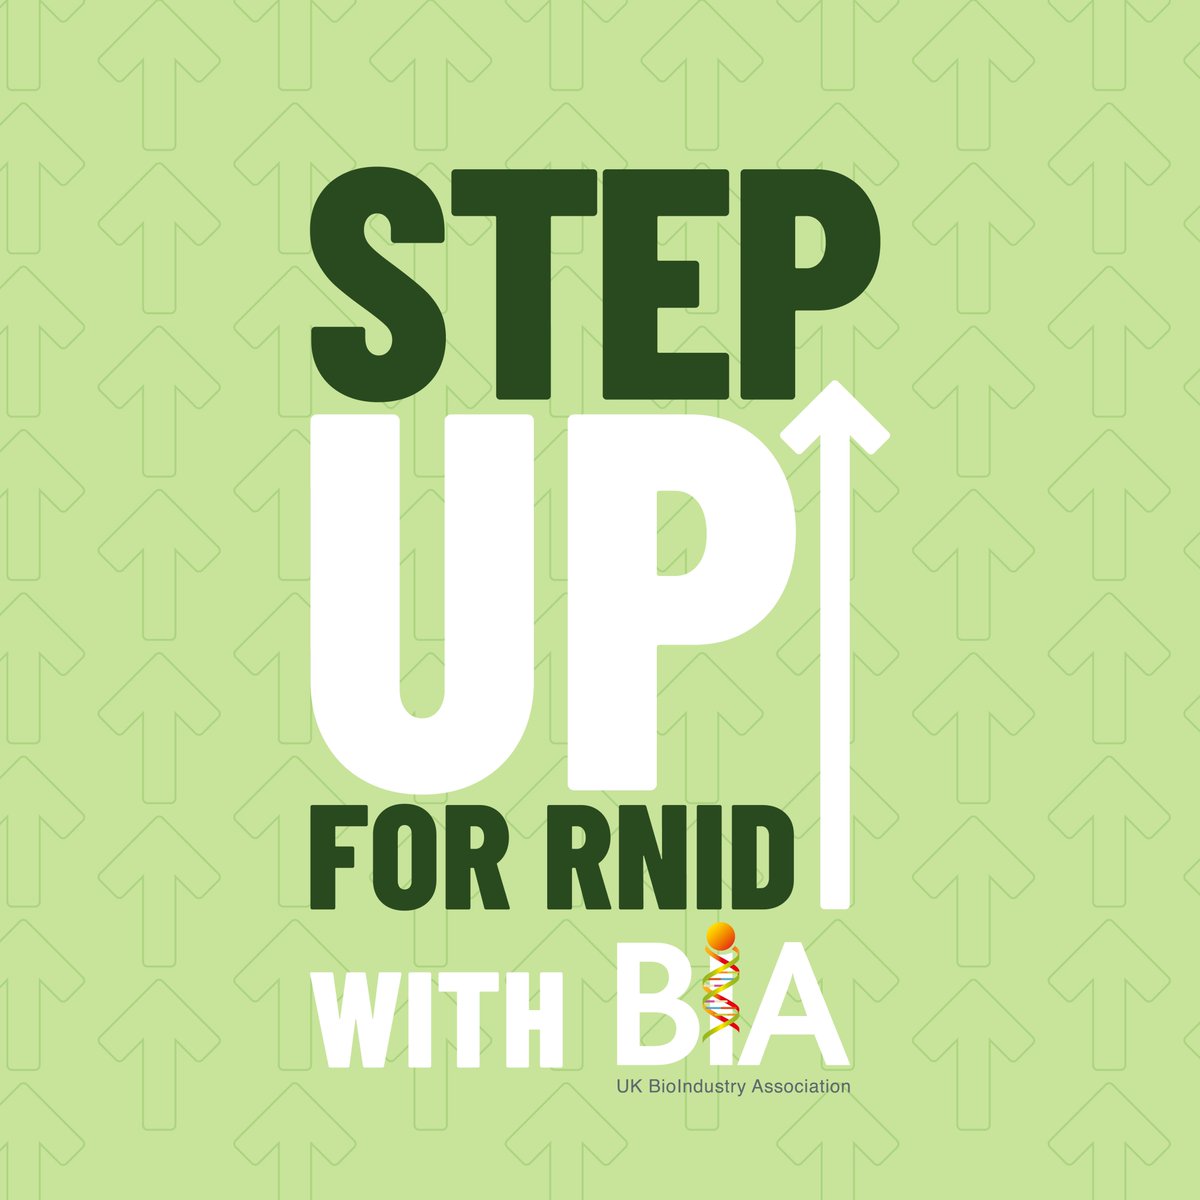 Only 6 days left to sign up to ‘Step Up for @RNID - with the BIA' #DeafAwarenessWeek challenge ➡️ ow.ly/HRg550RkV6h 🏃‍♂️ Run: strava.com/clubs/BIARunne… 🚶‍♂️ Walk: strava.com/clubs/BIAWalke… 🏊‍♂️ Swim: strava.com/clubs/BIASwimm… 🚴‍♂️ Cycle: strava.com/clubs/BIACycli… #BIAStepUpForRNID